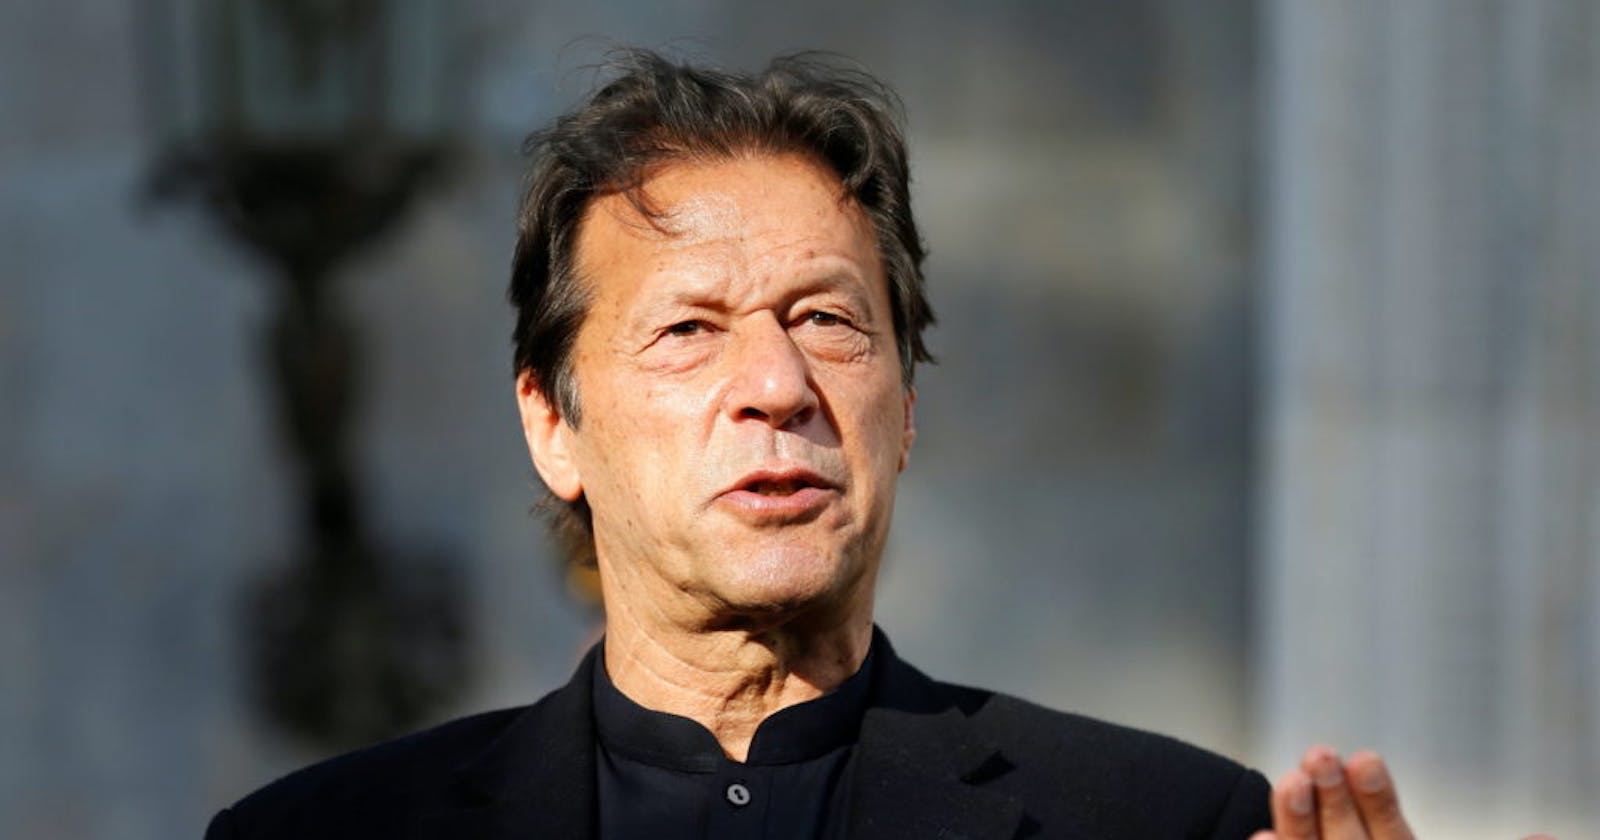 Pakistan's former Prime Minister Imran Khan gets bail in mutiny case